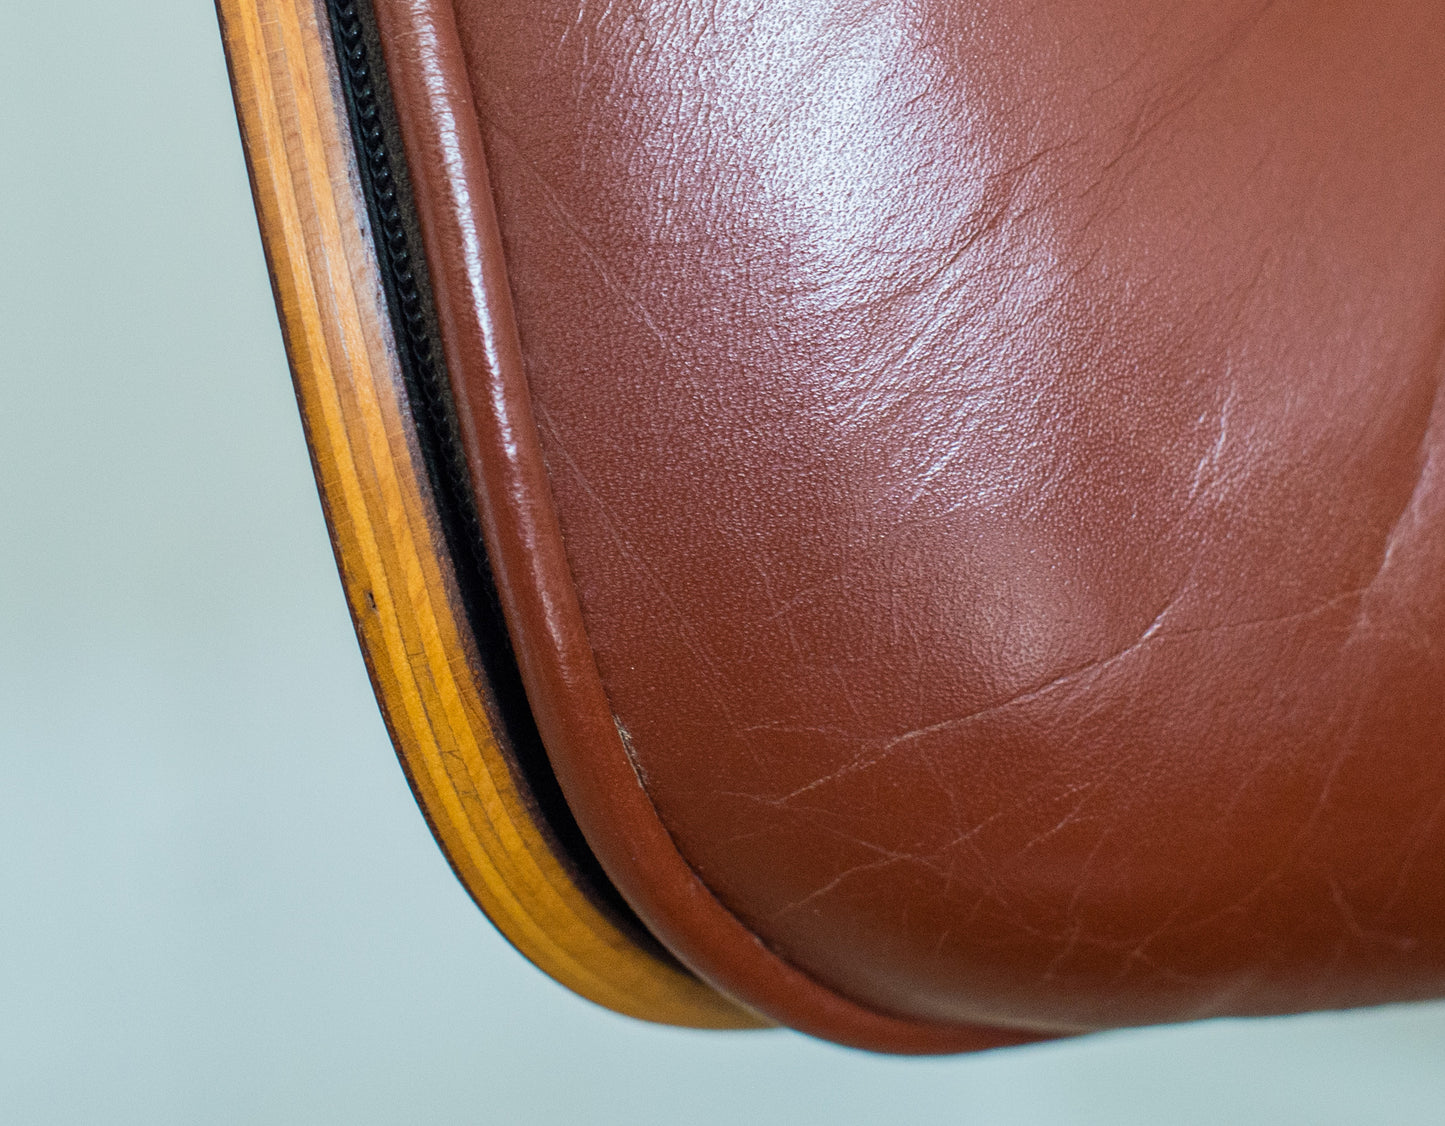 Vintage Rosewood Eames Lounge Chair By Herman Miller 670 Circa 1970s